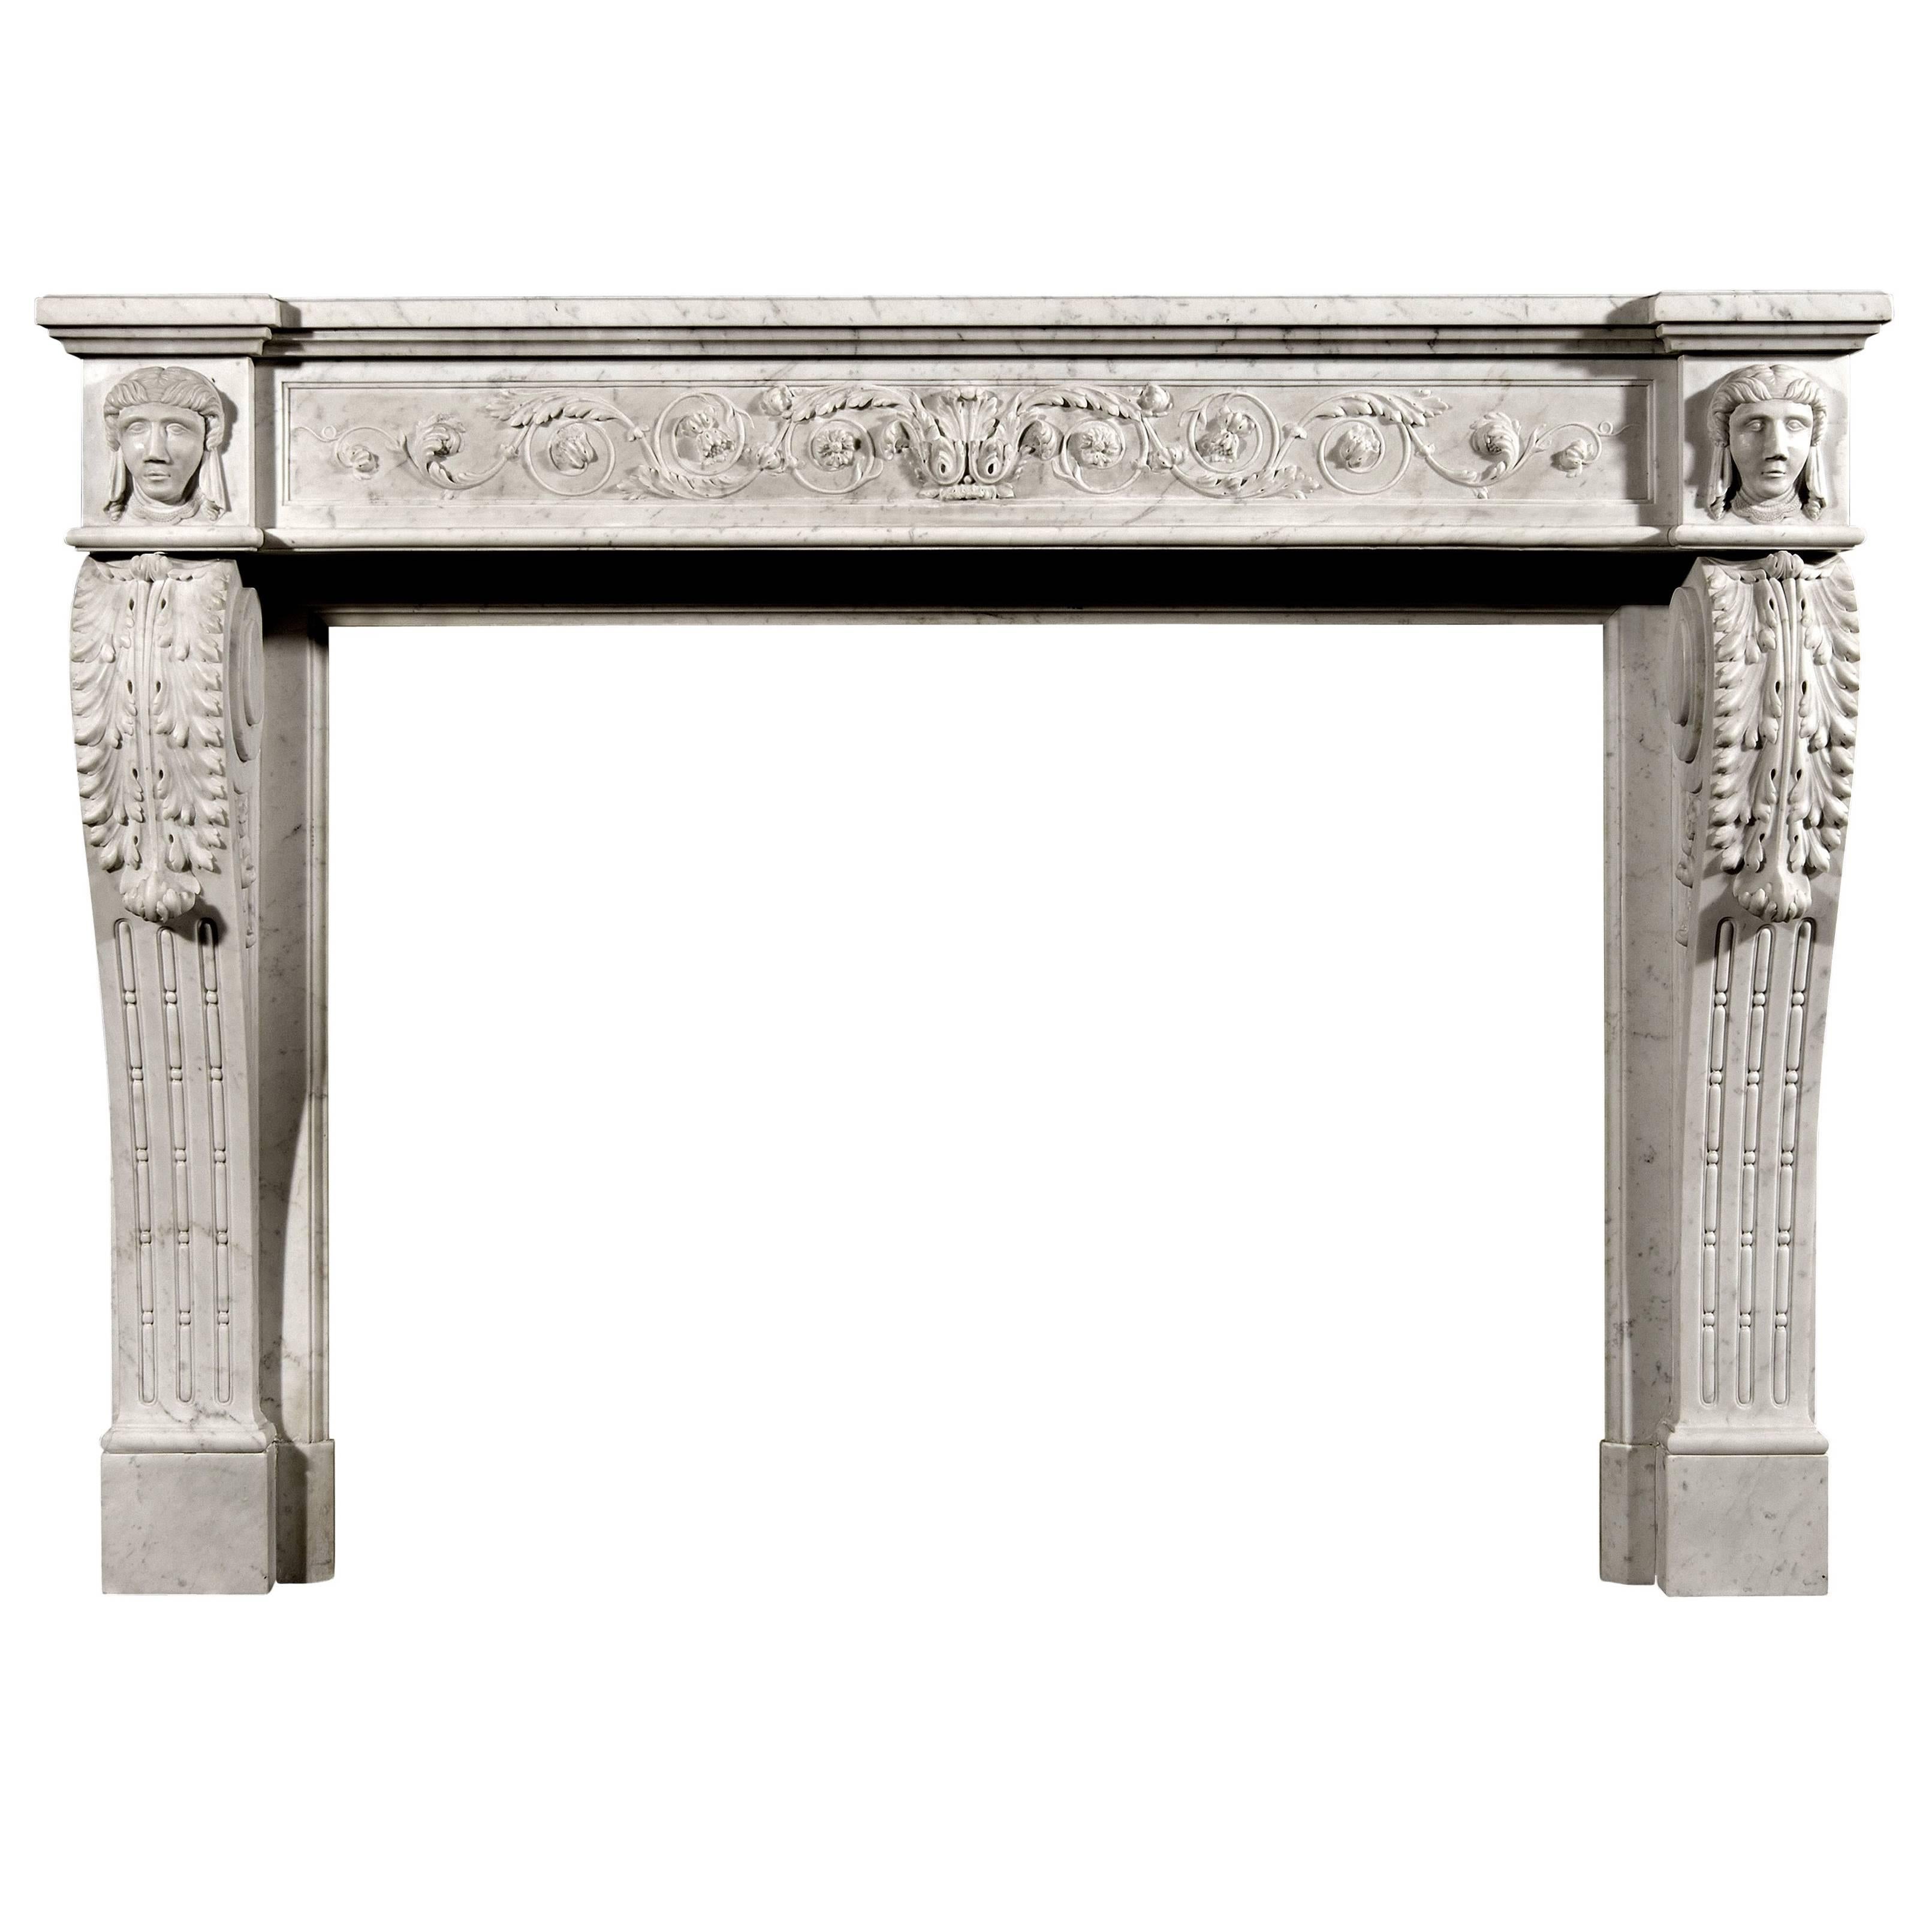 Unusual 19th Century, French XVI Style Carrara Marble Fireplace For Sale